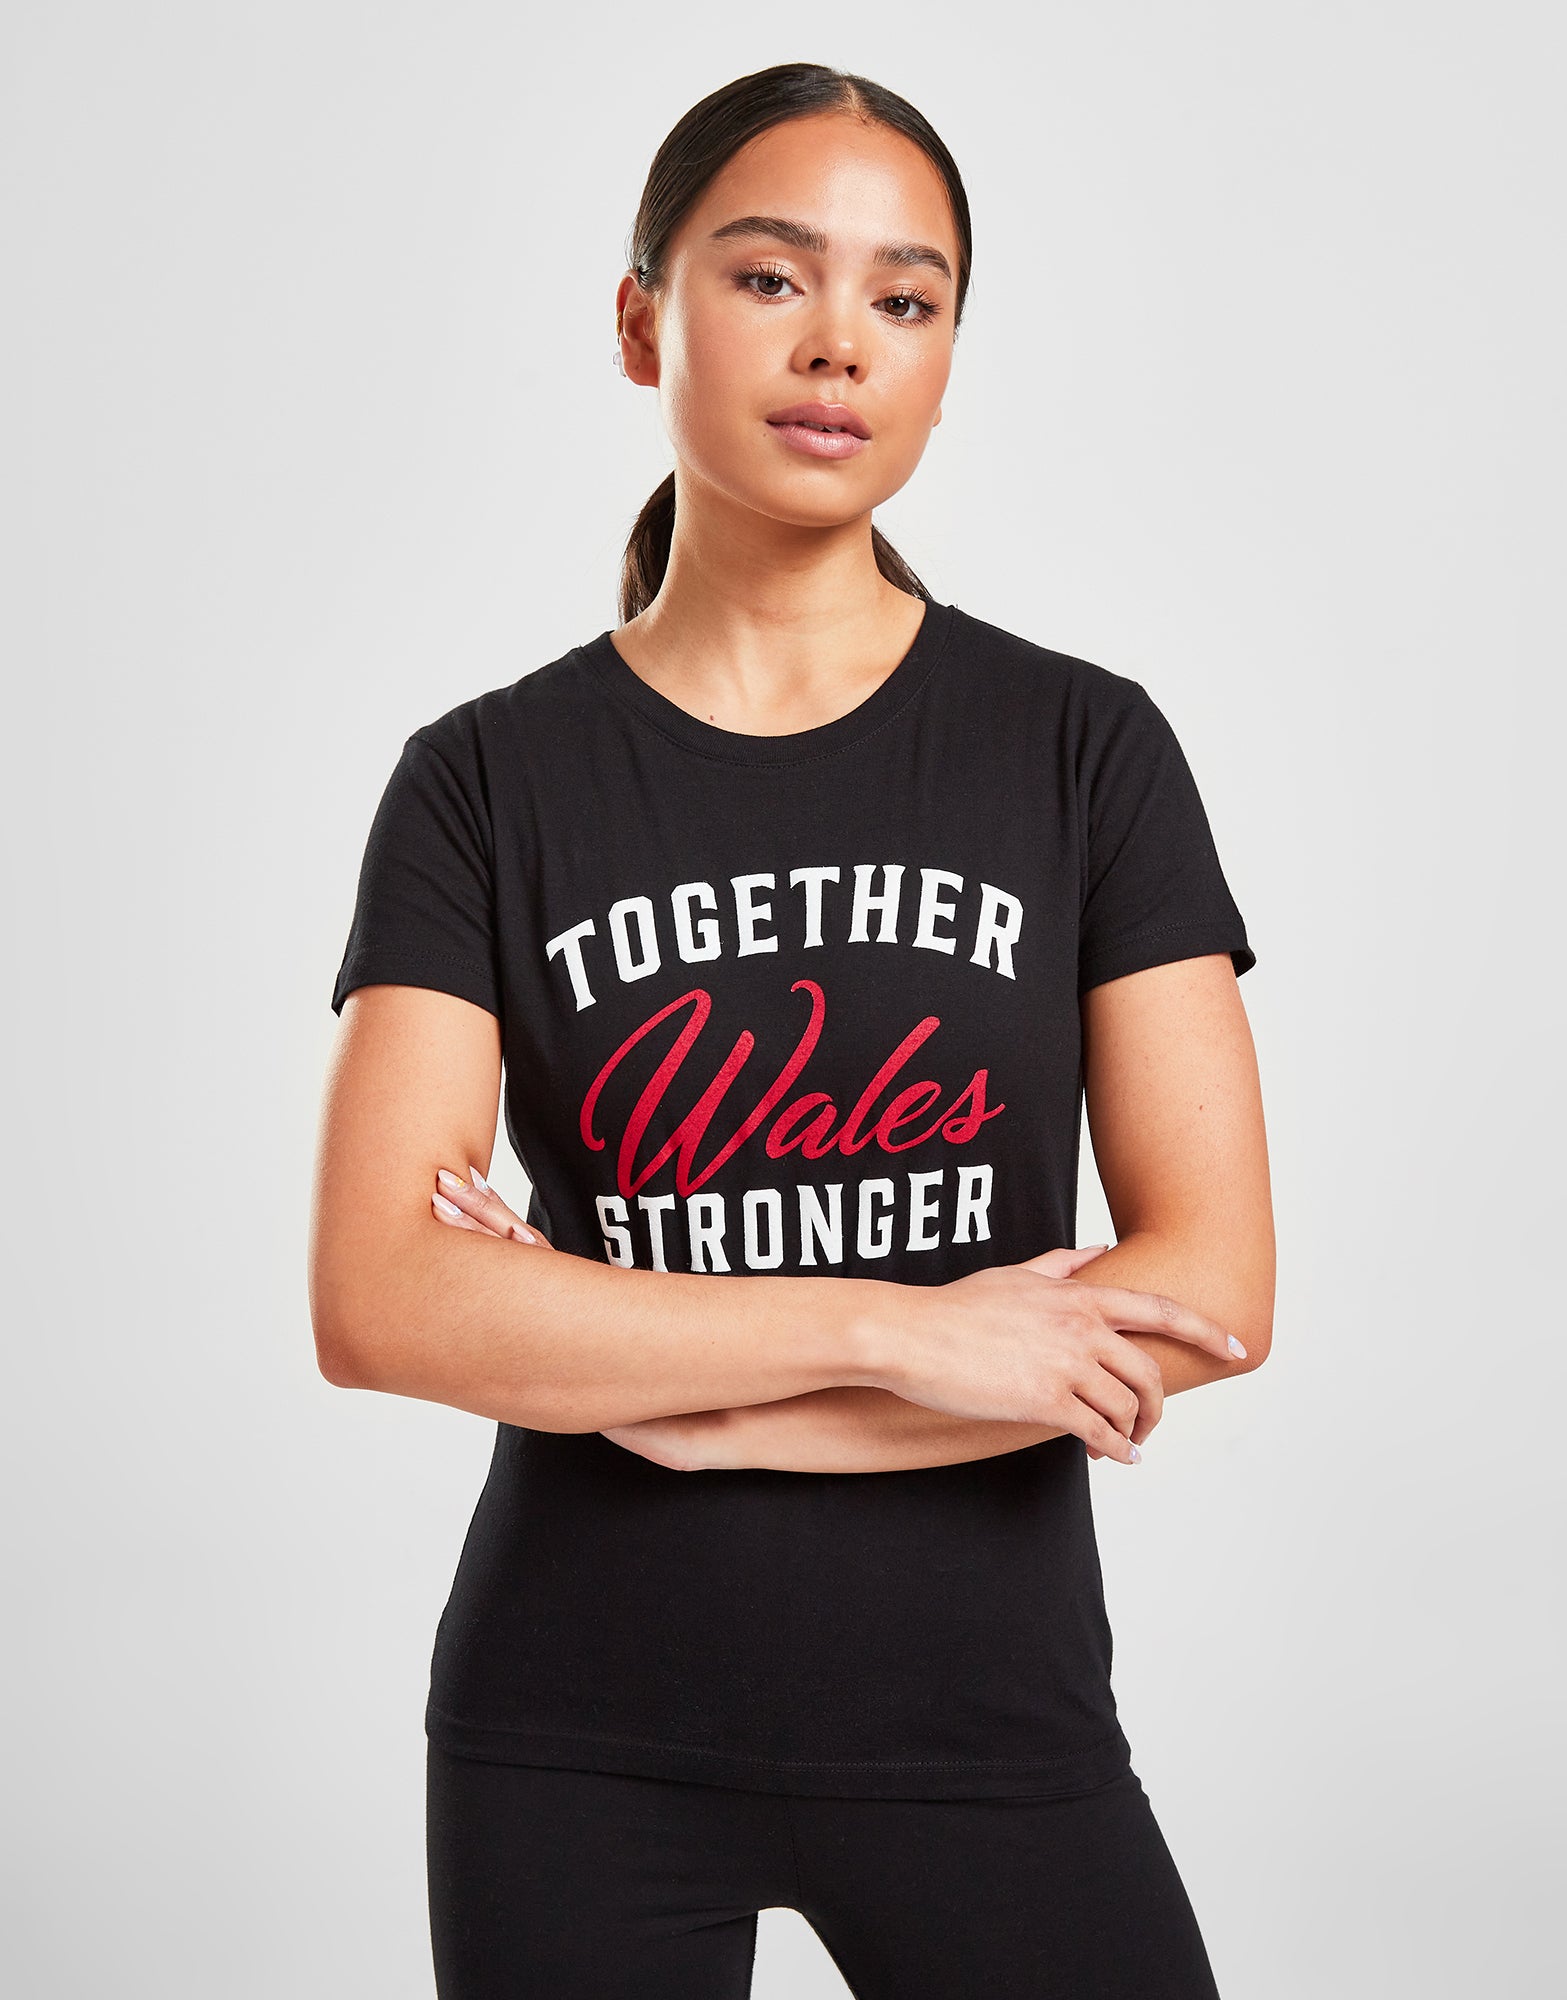 Official Team Wales Womens 'Together Stronger' T-Shirt - Black - The World Football Store